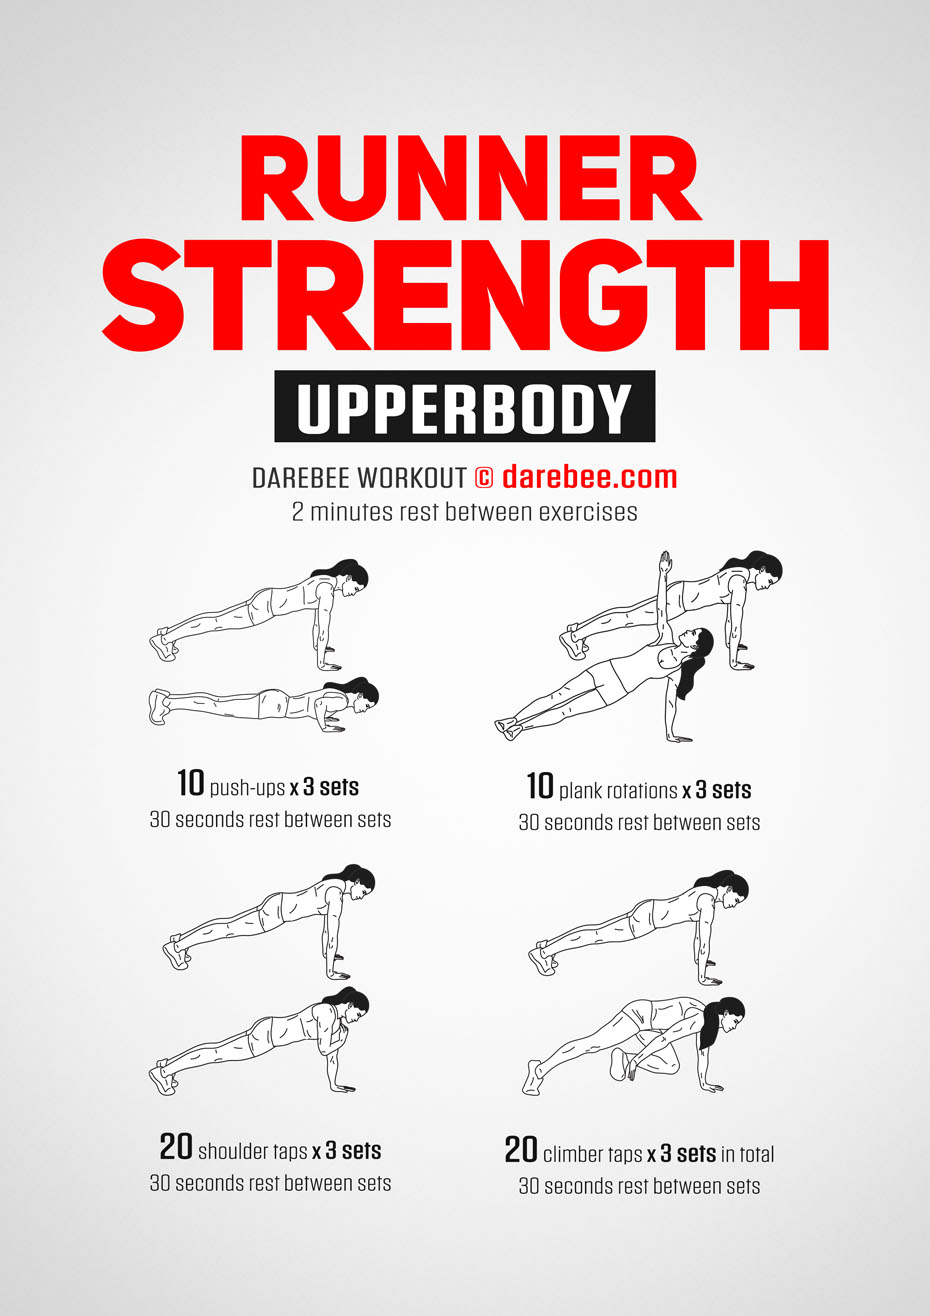 10 Minute Upper Body Workout for Runners